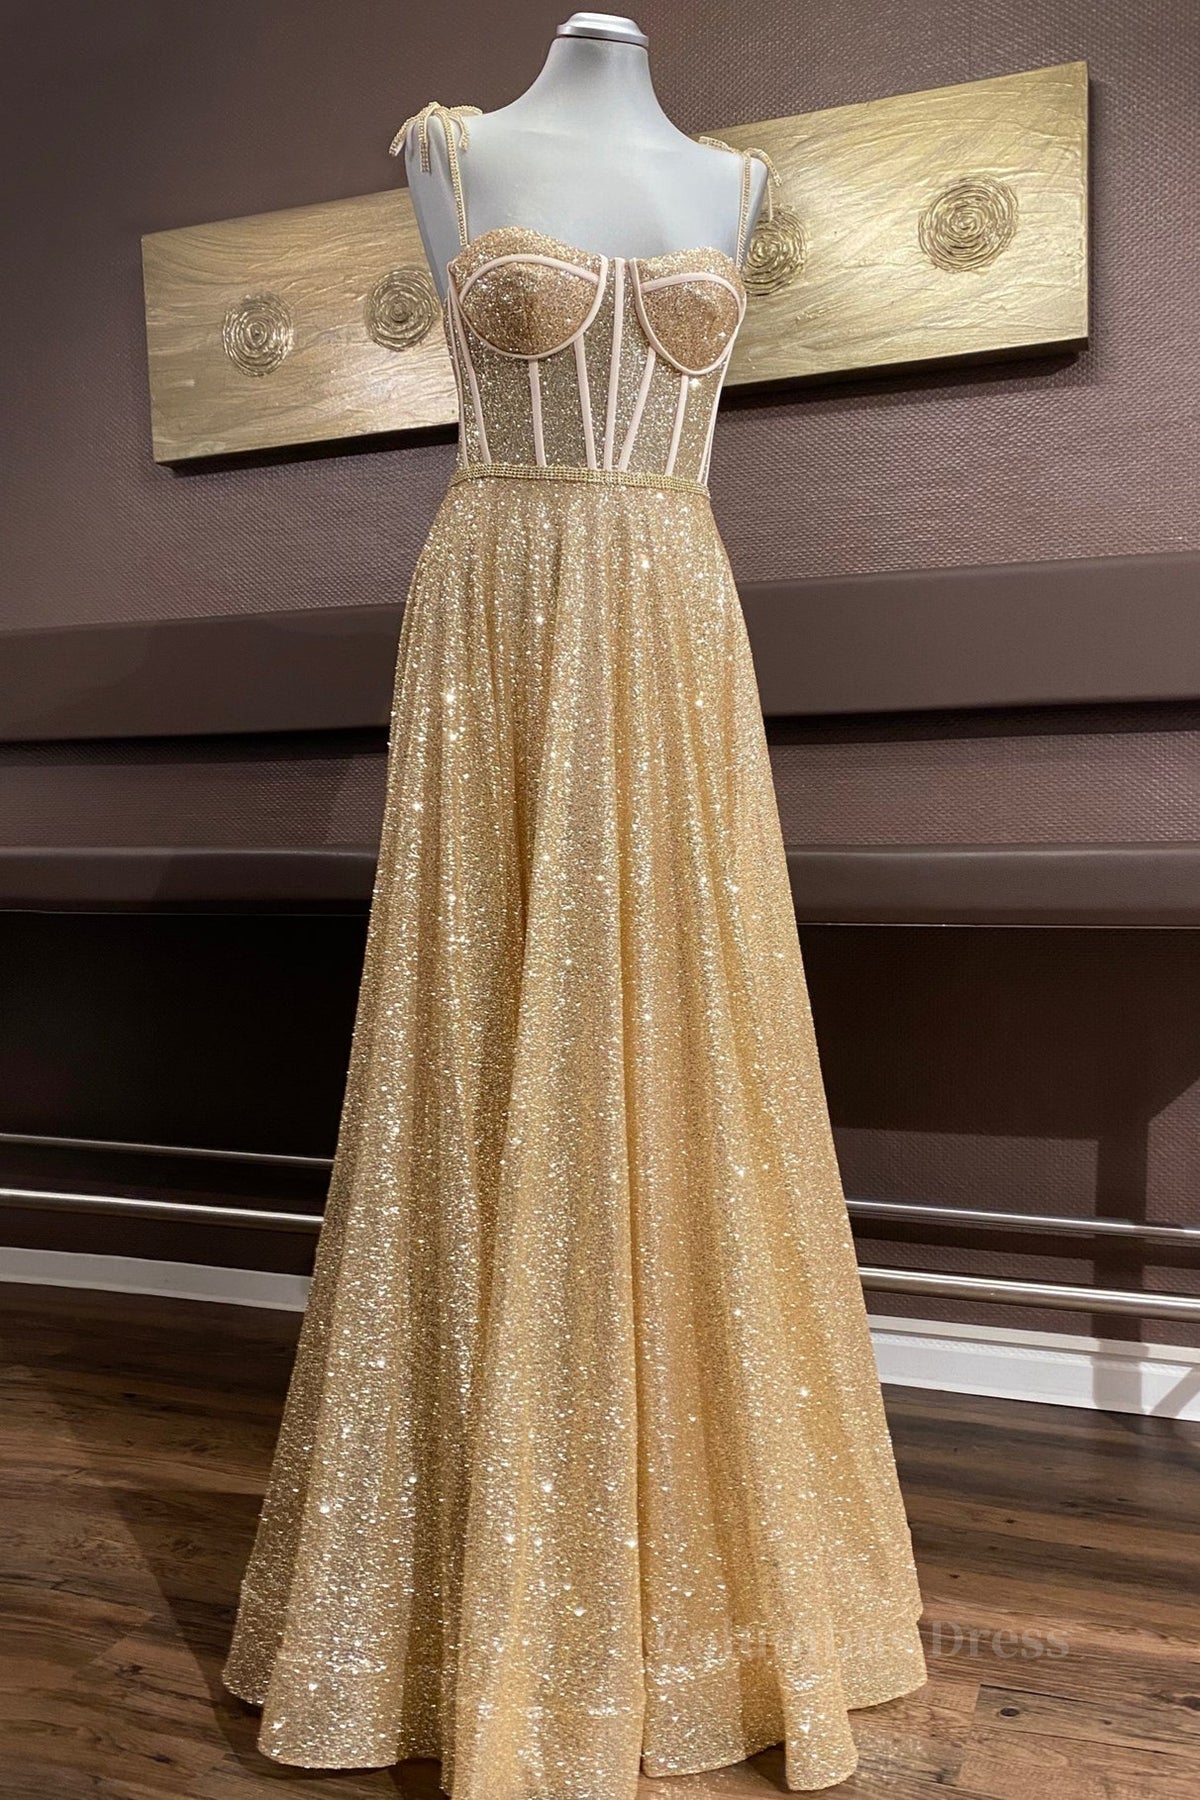 Bridesmaid Dress With Sleeve, Shiny A Line Spaghetti Straps Gold Prom Dresses Long, Sweetheart Neck Golden Formal Dresses, Gold Tulle Evening Dresses WT1856